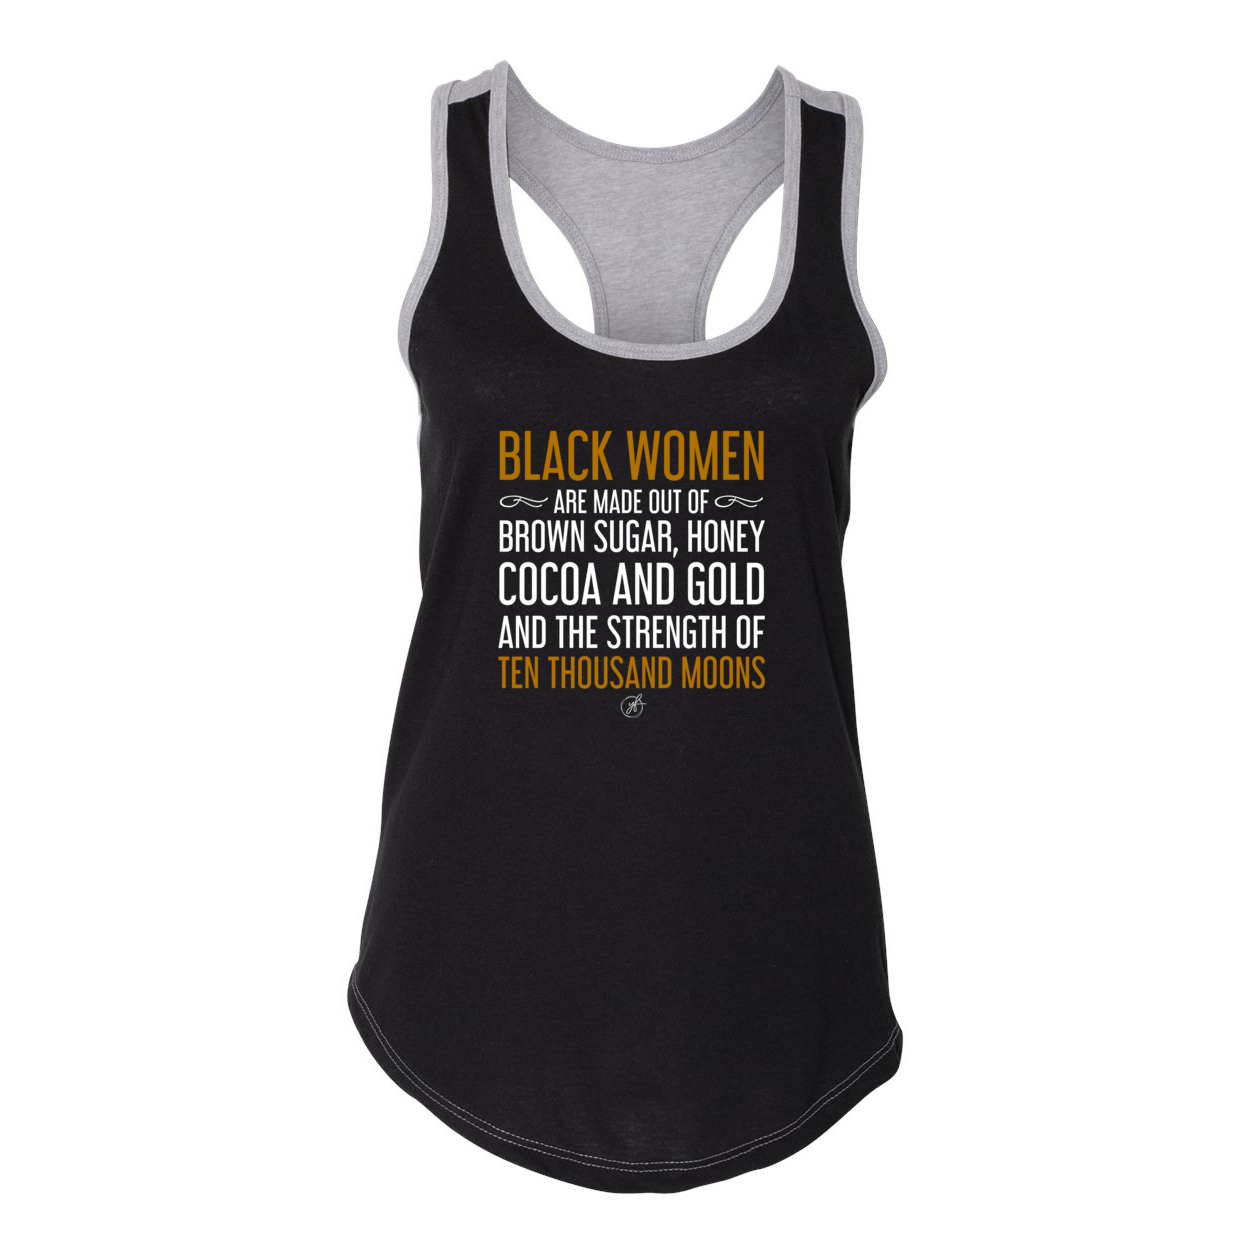 YOLO FITTED'S, "BLACK WOMEN ARE MADE OF...." RACER BACK TANK